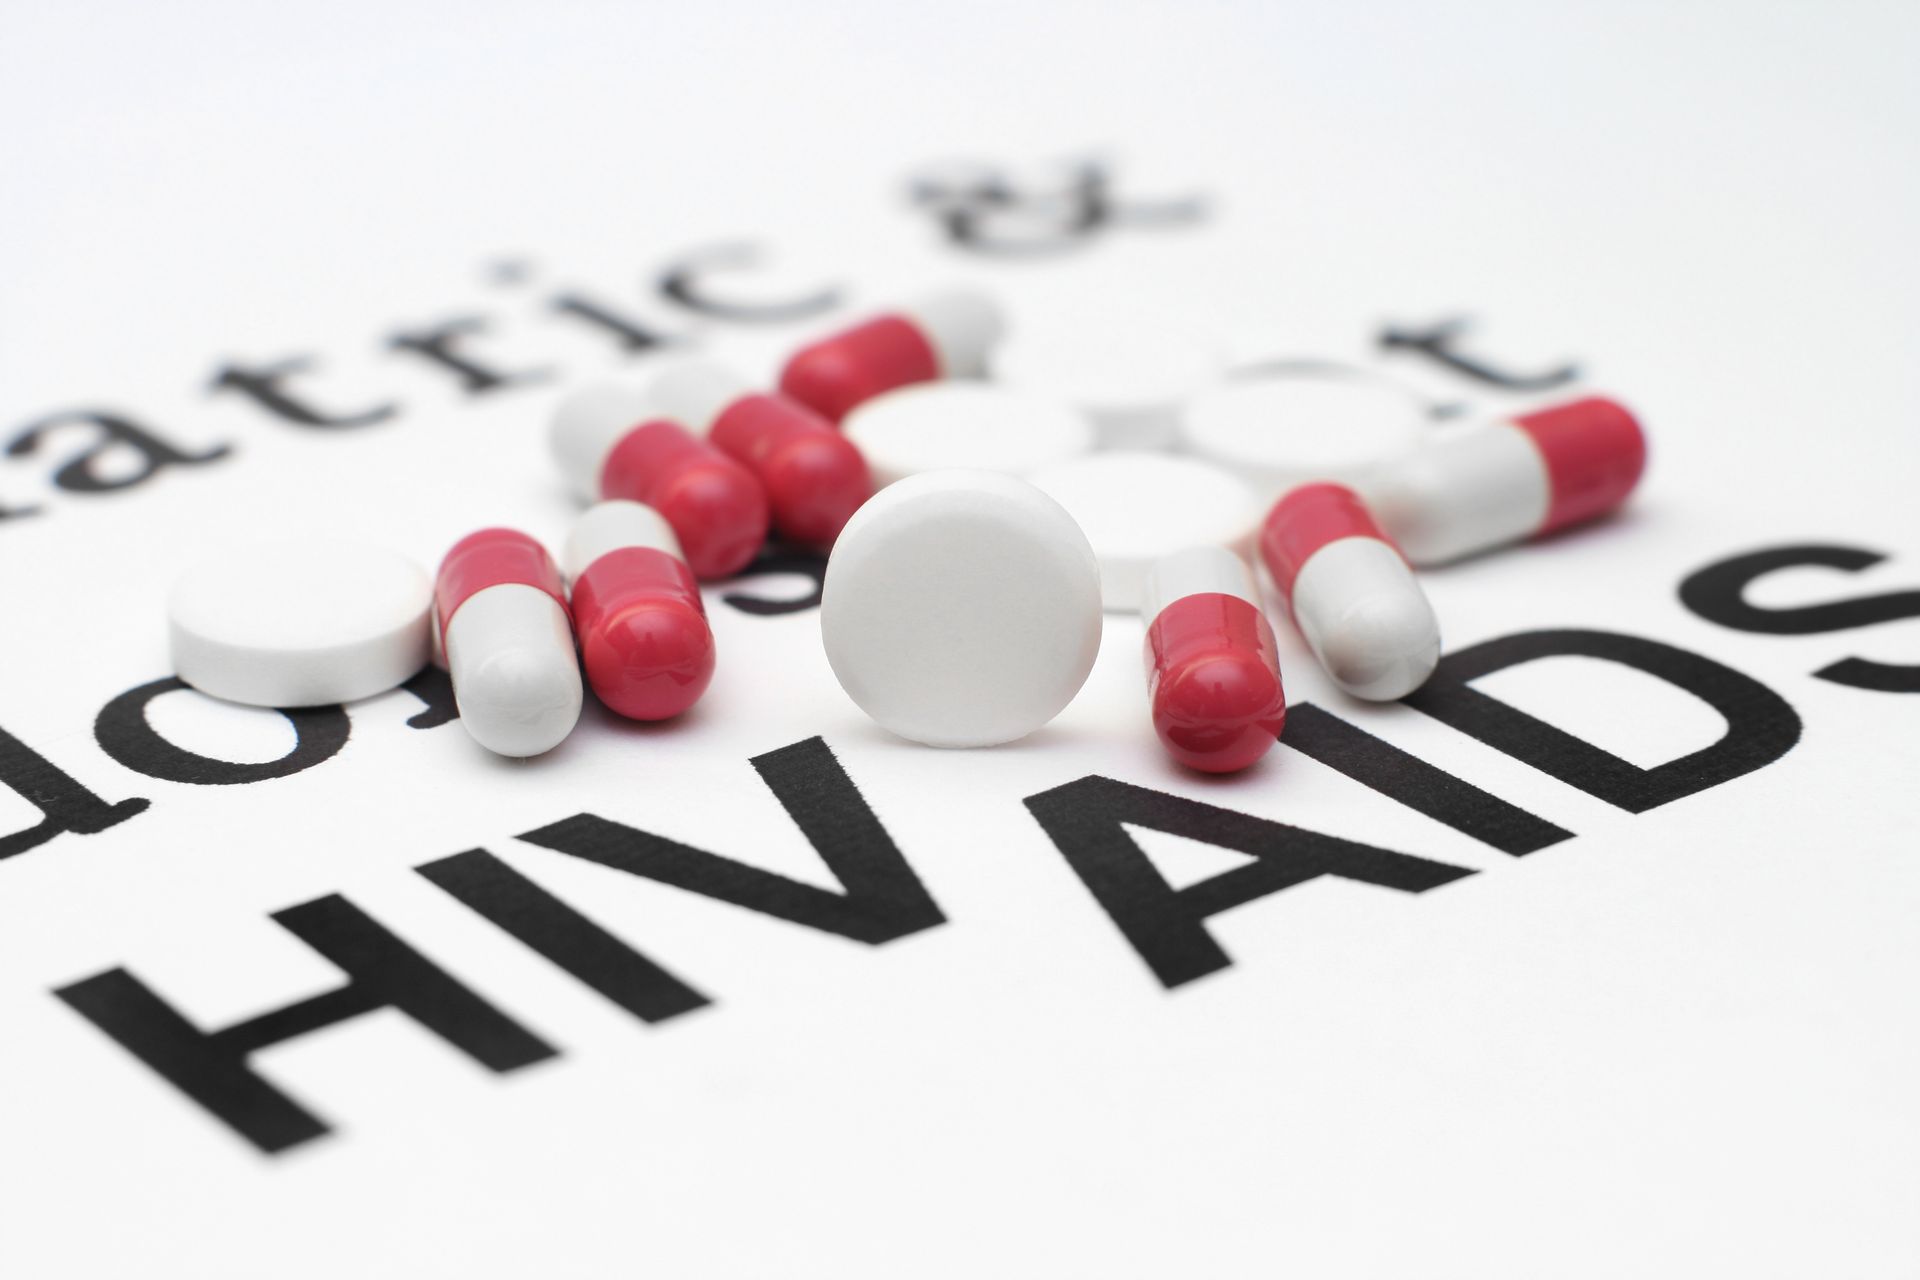 HIV medication and treatment at St. Hope